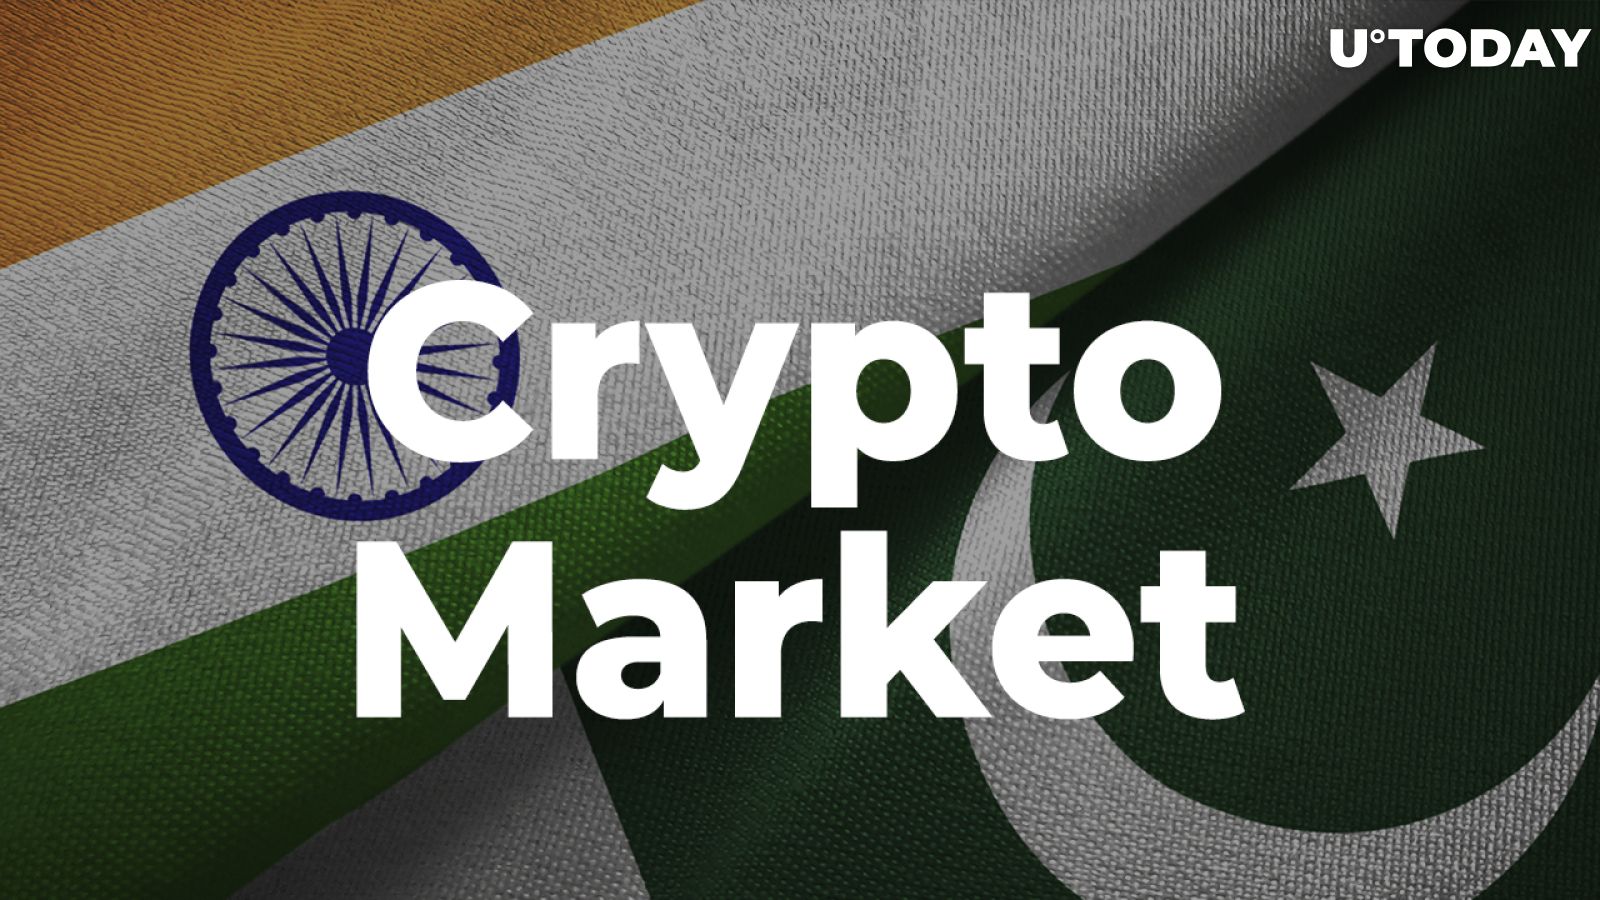 Crypto Market in India and Pakistan Soars 641% and 711% in 12 Months: Chainalysis